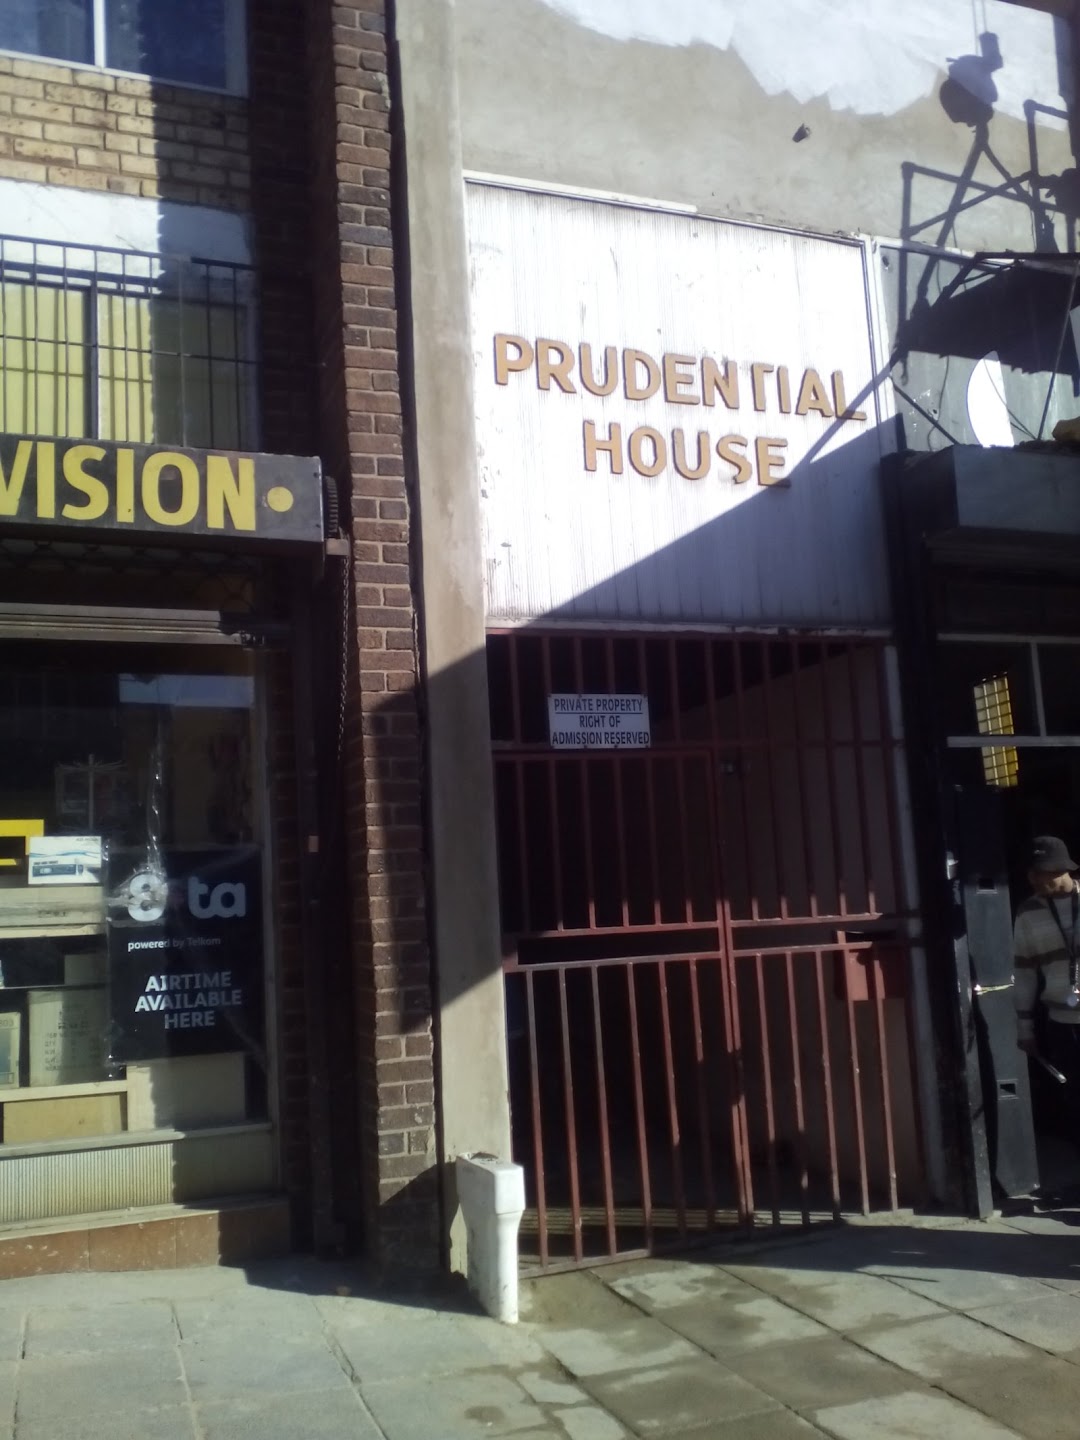 Prudential House